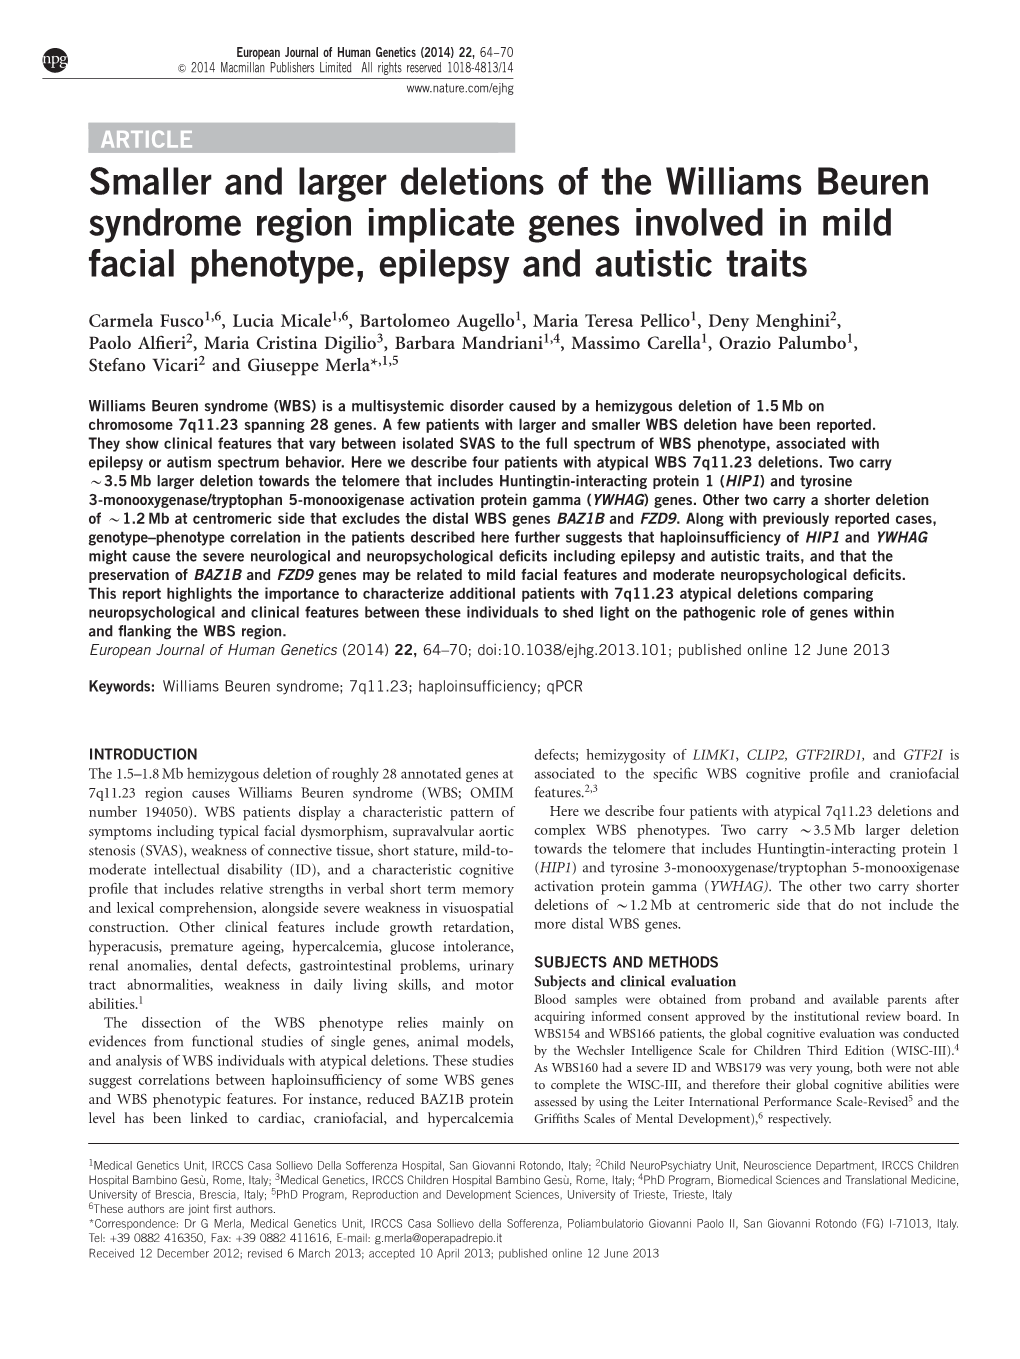 Smaller and Larger Deletions of the Williams Beuren Syndrome Region Implicate Genes Involved in Mild Facial Phenotype, Epilepsy and Autistic Traits